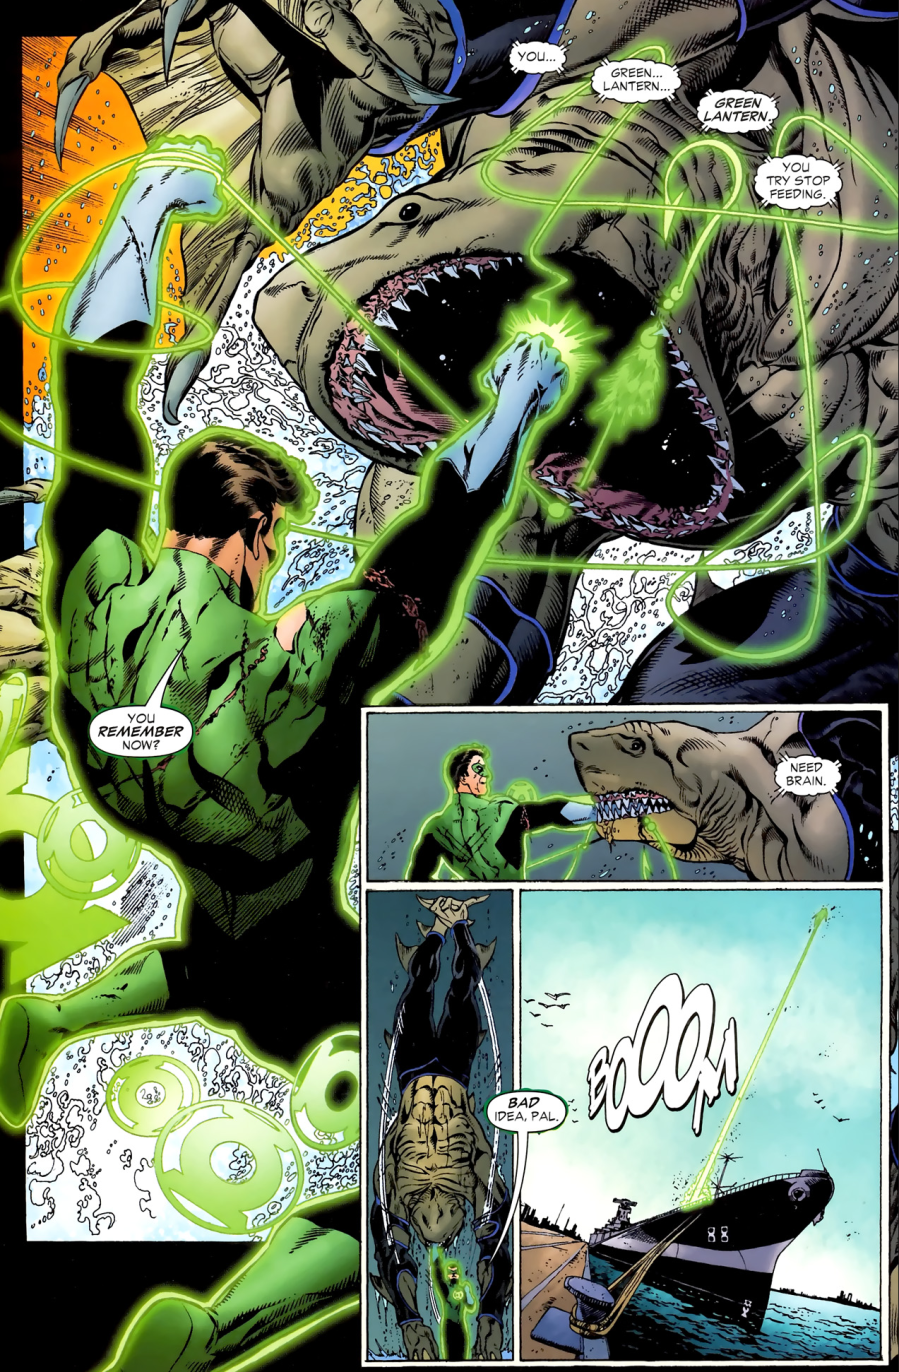 Hal Jordan comes to blows with Karshon in Green Lantern Vol. 4 #5 "Feeding Frenzy" (2005), DC Comics. Words by Geoff Johns, art by EthanVan Sciver, Prentis Rollins, Peter Steigerwald, and Rob Leigh. 